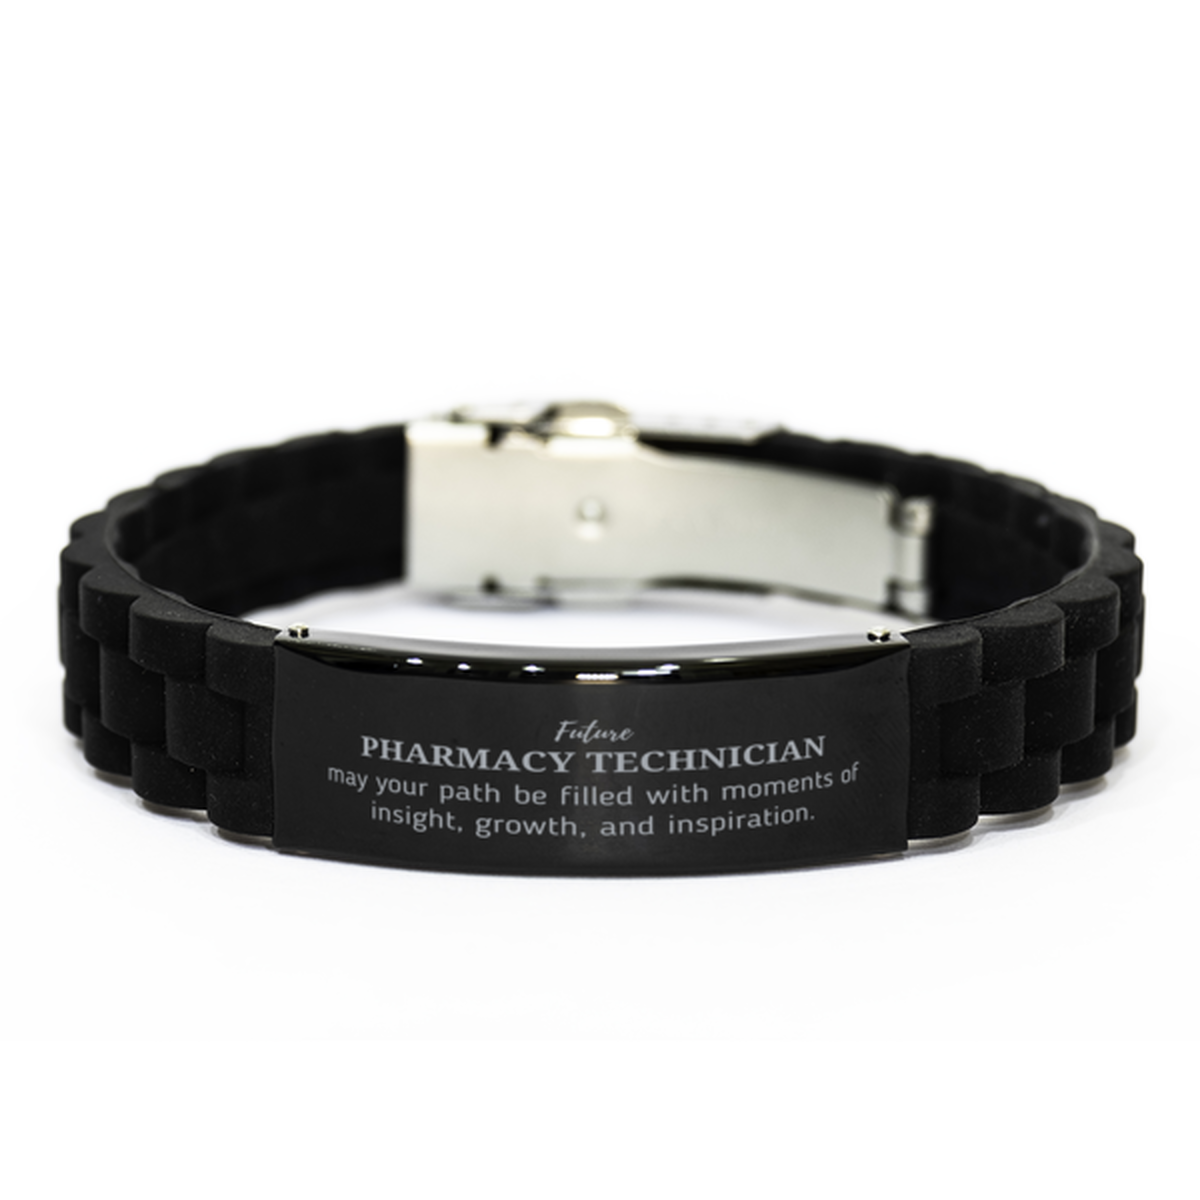 Future Pharmacy Technician Gifts, May your path be filled with moments of insight, Graduation Gifts for New Pharmacy Technician, Christmas Unique Black Glidelock Clasp Bracelet For Men, Women, Friends